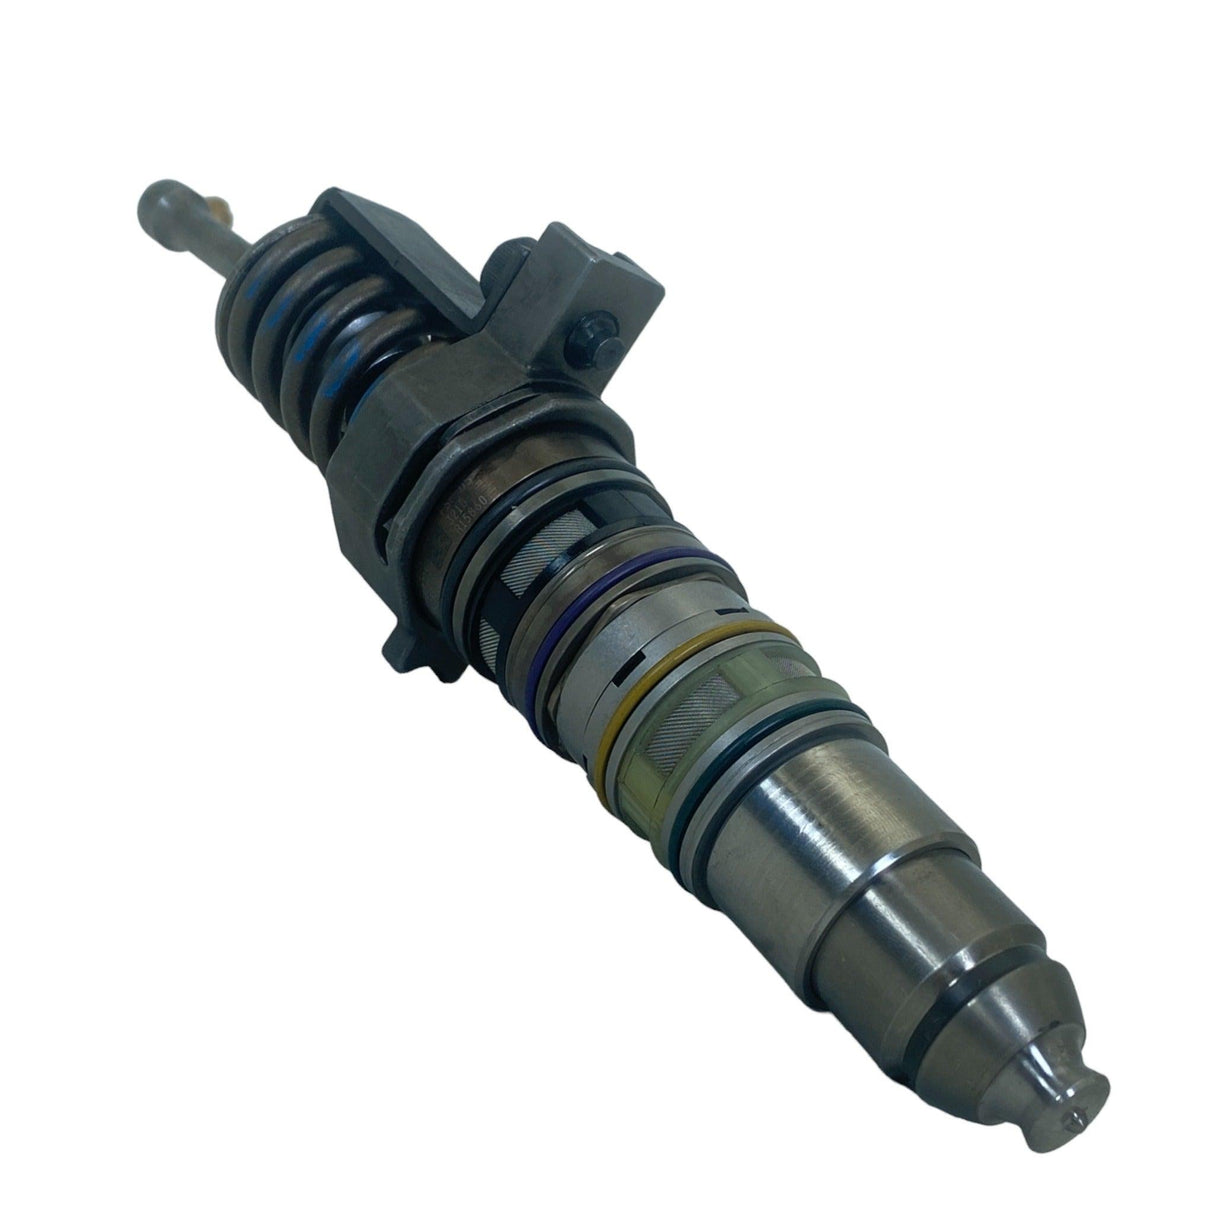 4088665Px Oem Cummins Fuel Injector For Isx No Core Charge.